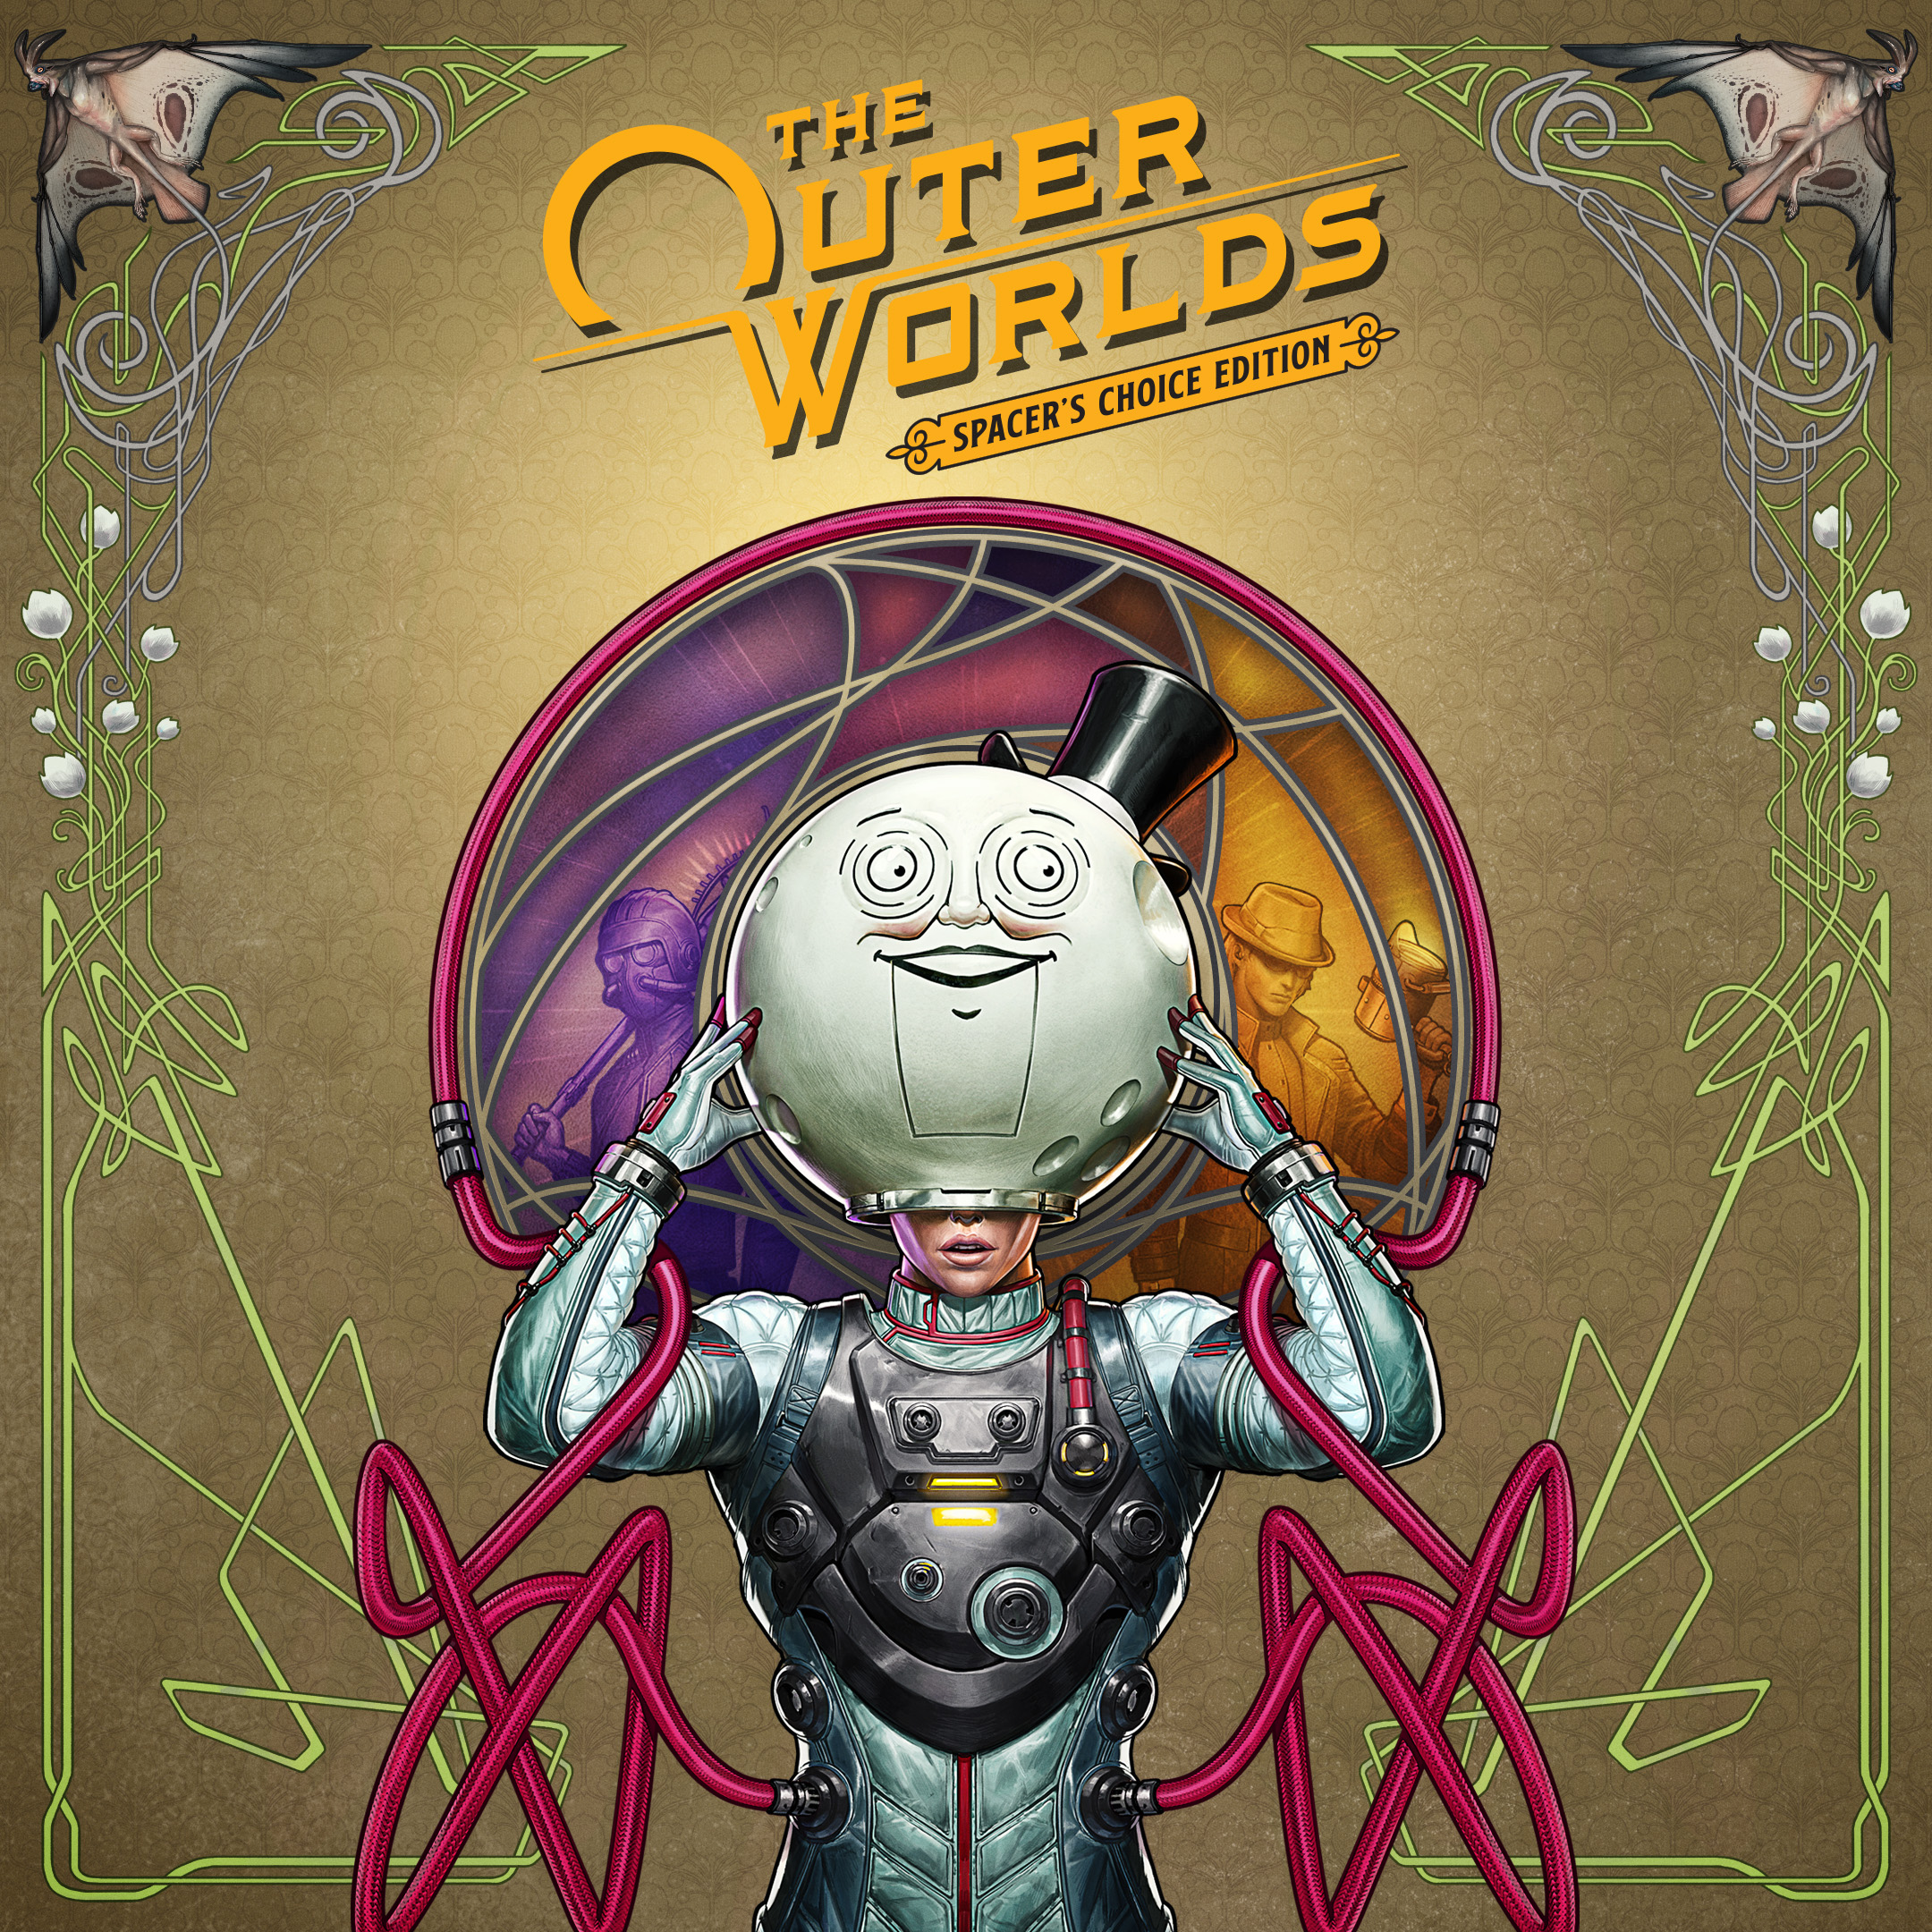 The Outer Worlds: Spacer